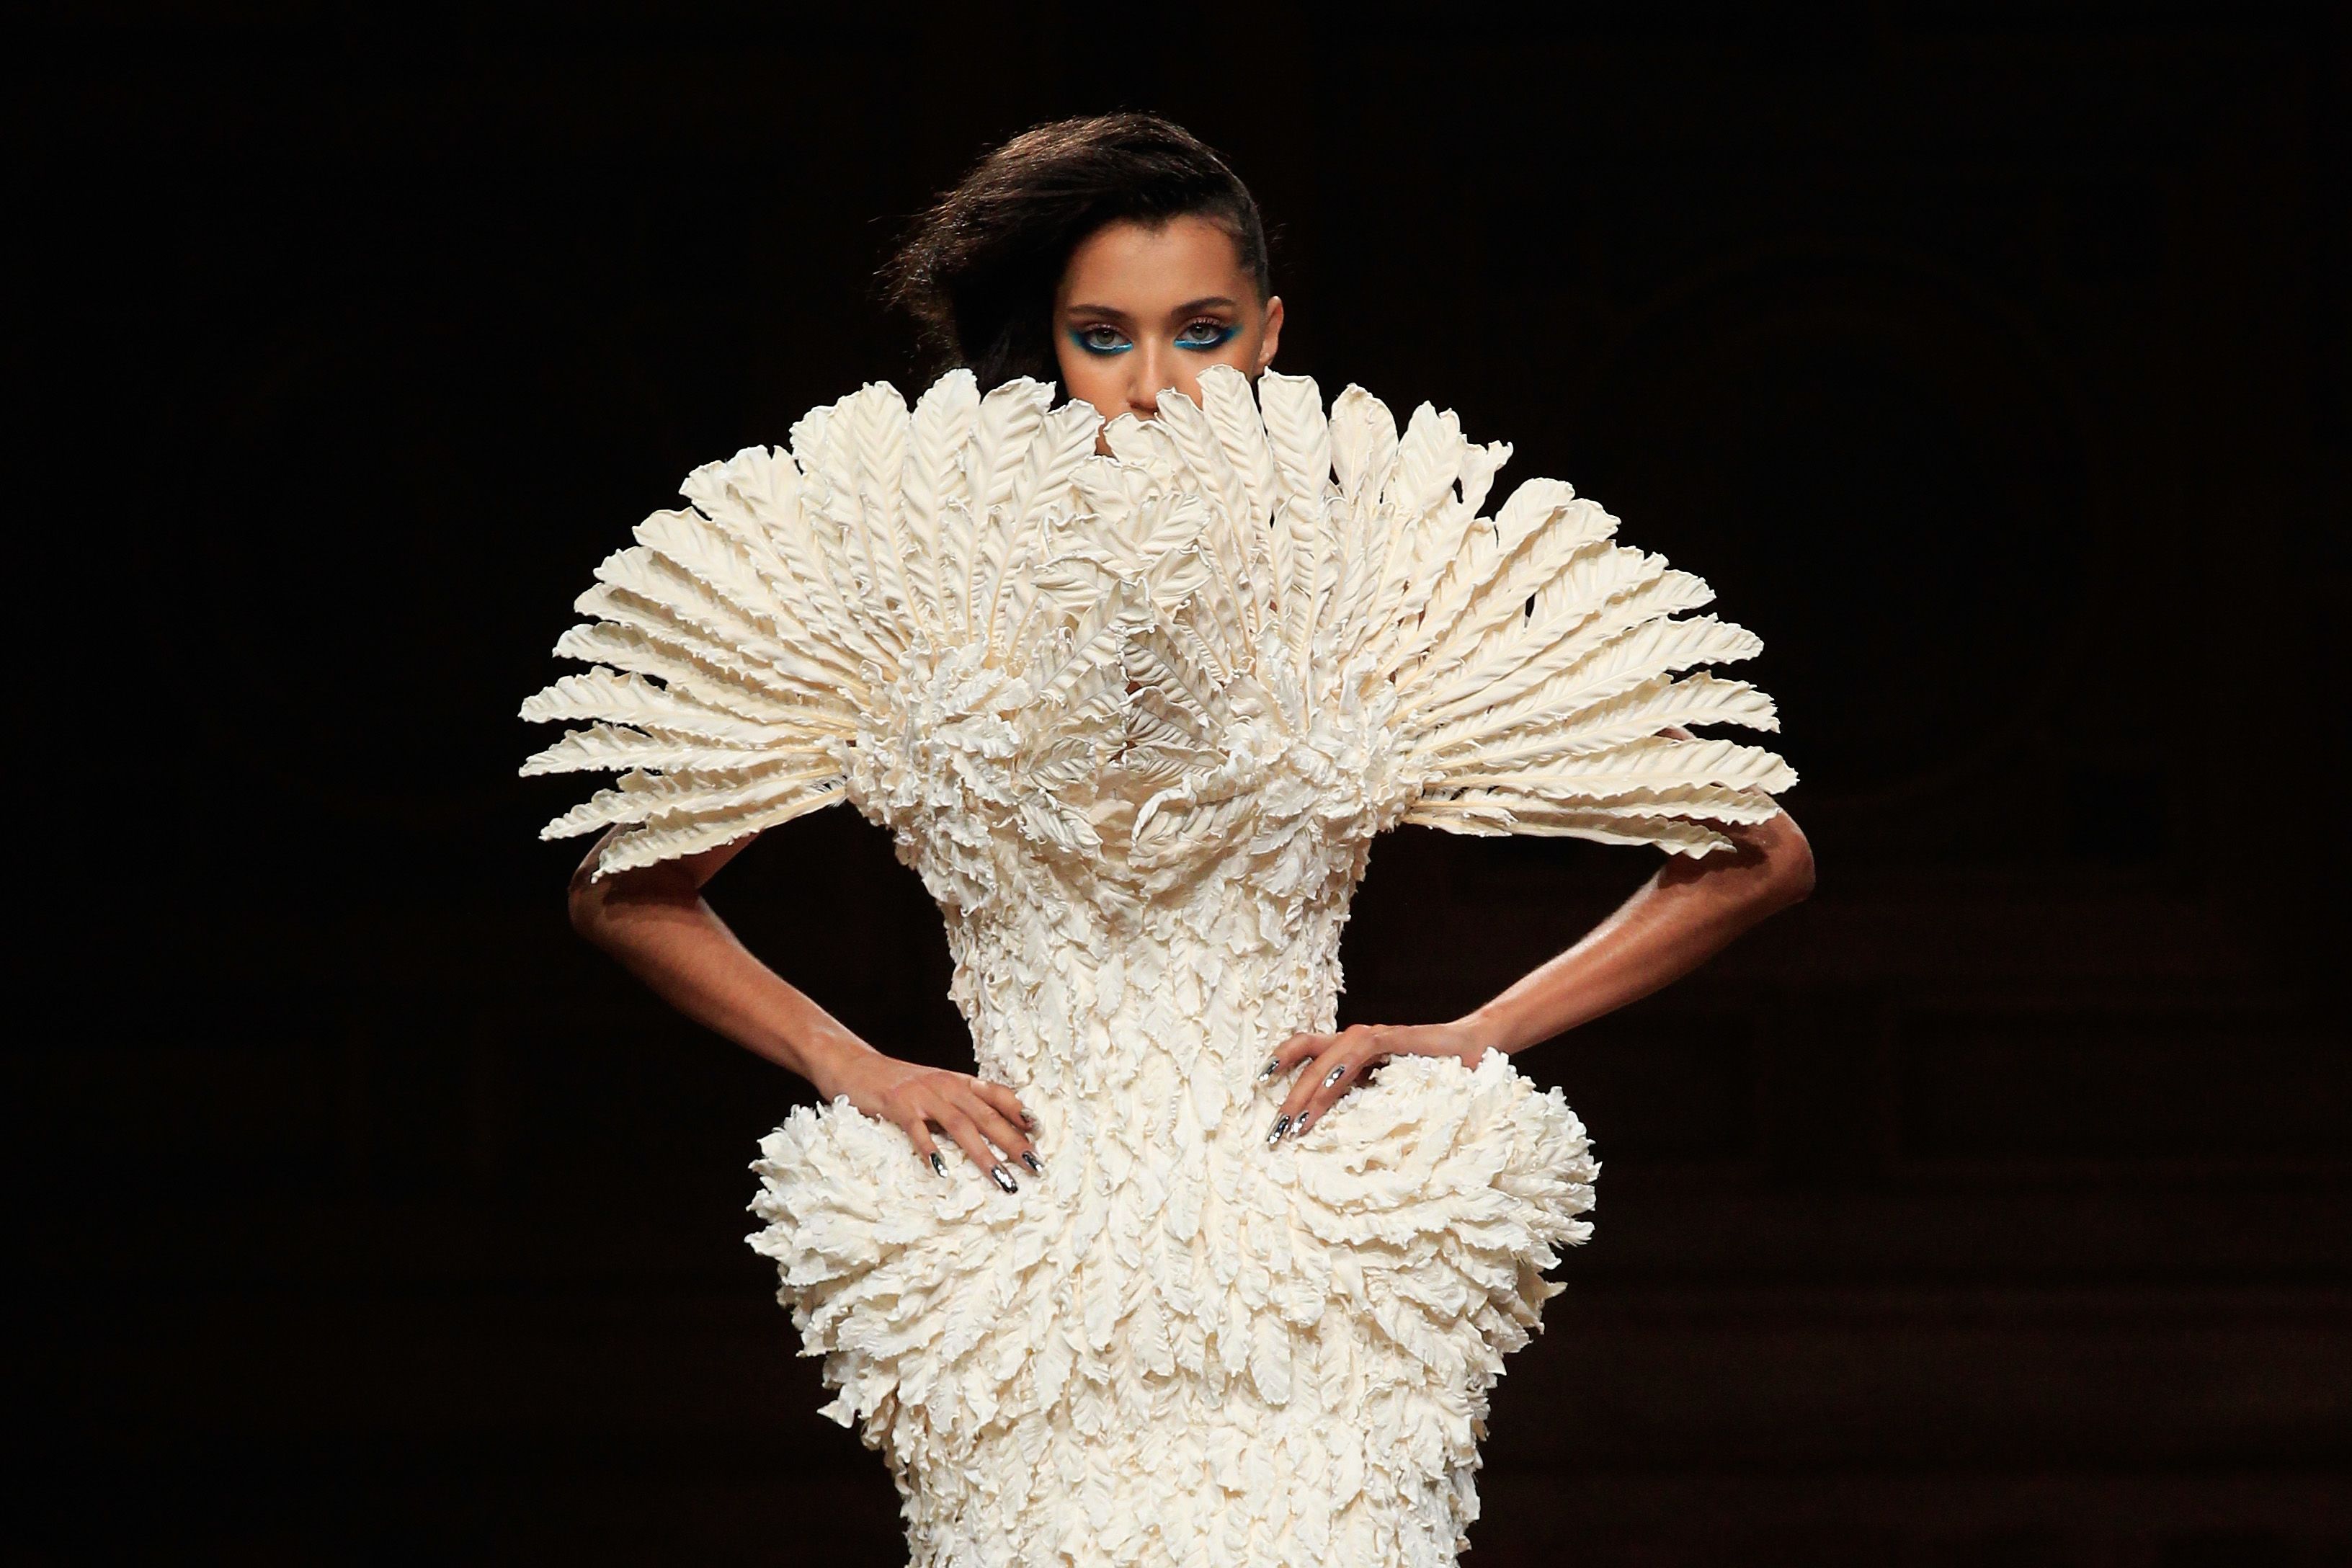 Hand-crafted luxury and $100K price tags: This is haute couture